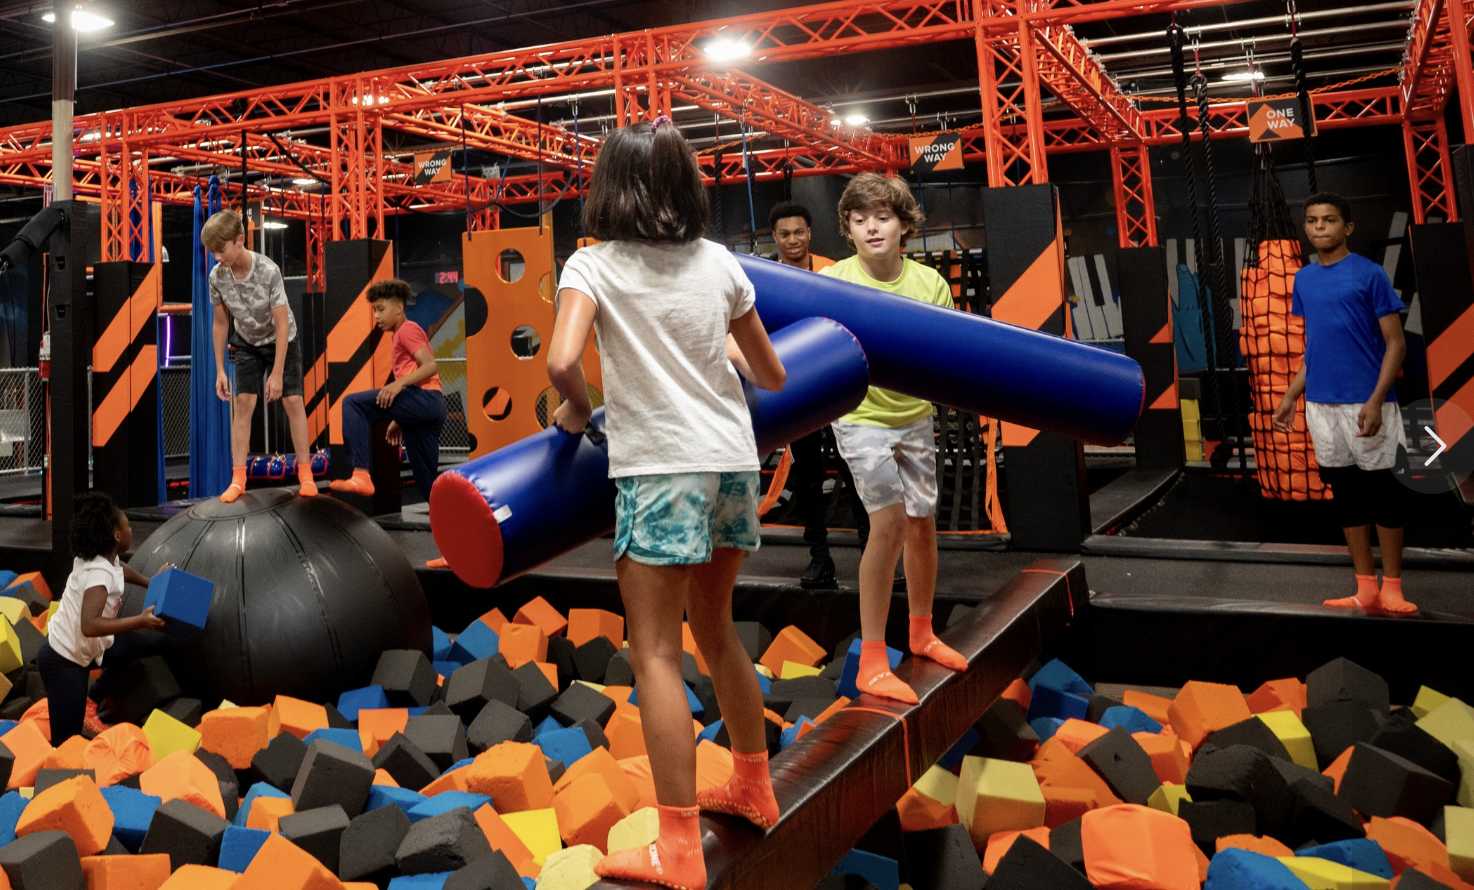 Arlington might be getting a Sky Zone trampoline and indoor entertainment park